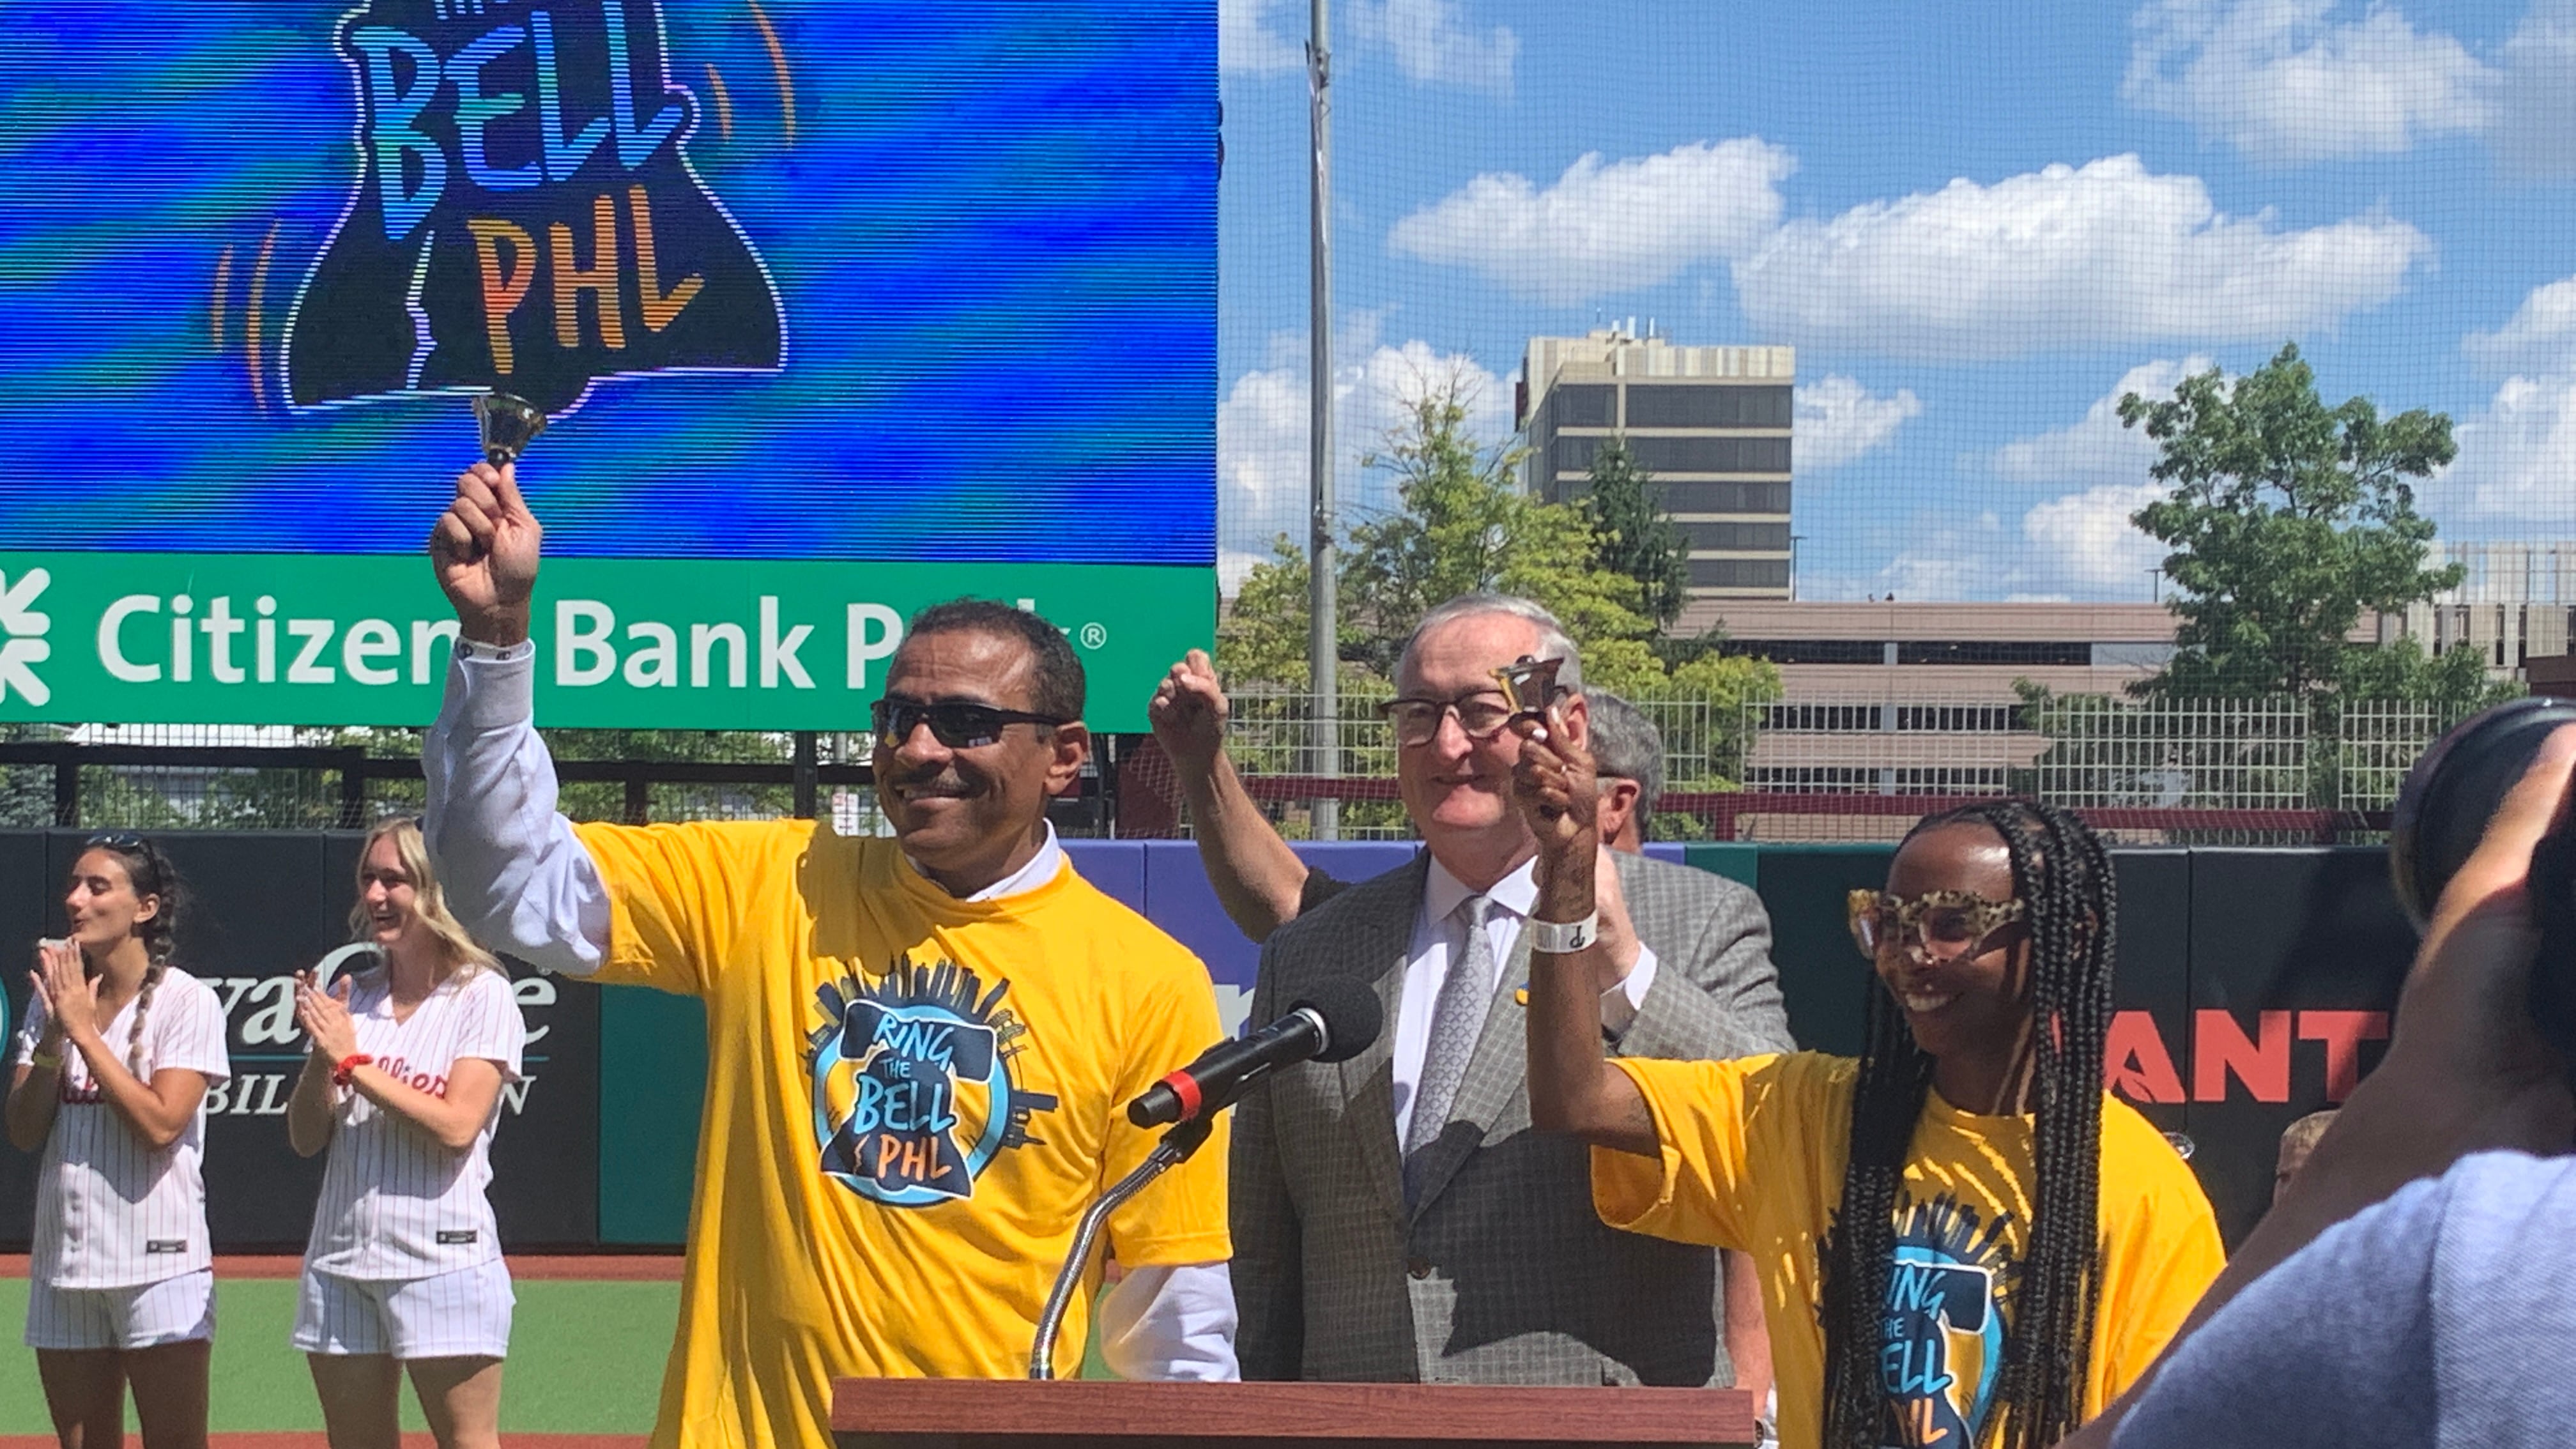 A man in a yellow T-shirt and white long sleeve shirt raises his right hand and rings a bell with it while standing behind a podium on a baseball field. A man in a suit and a woman in a yellow T-shirt also stand behind the podium.